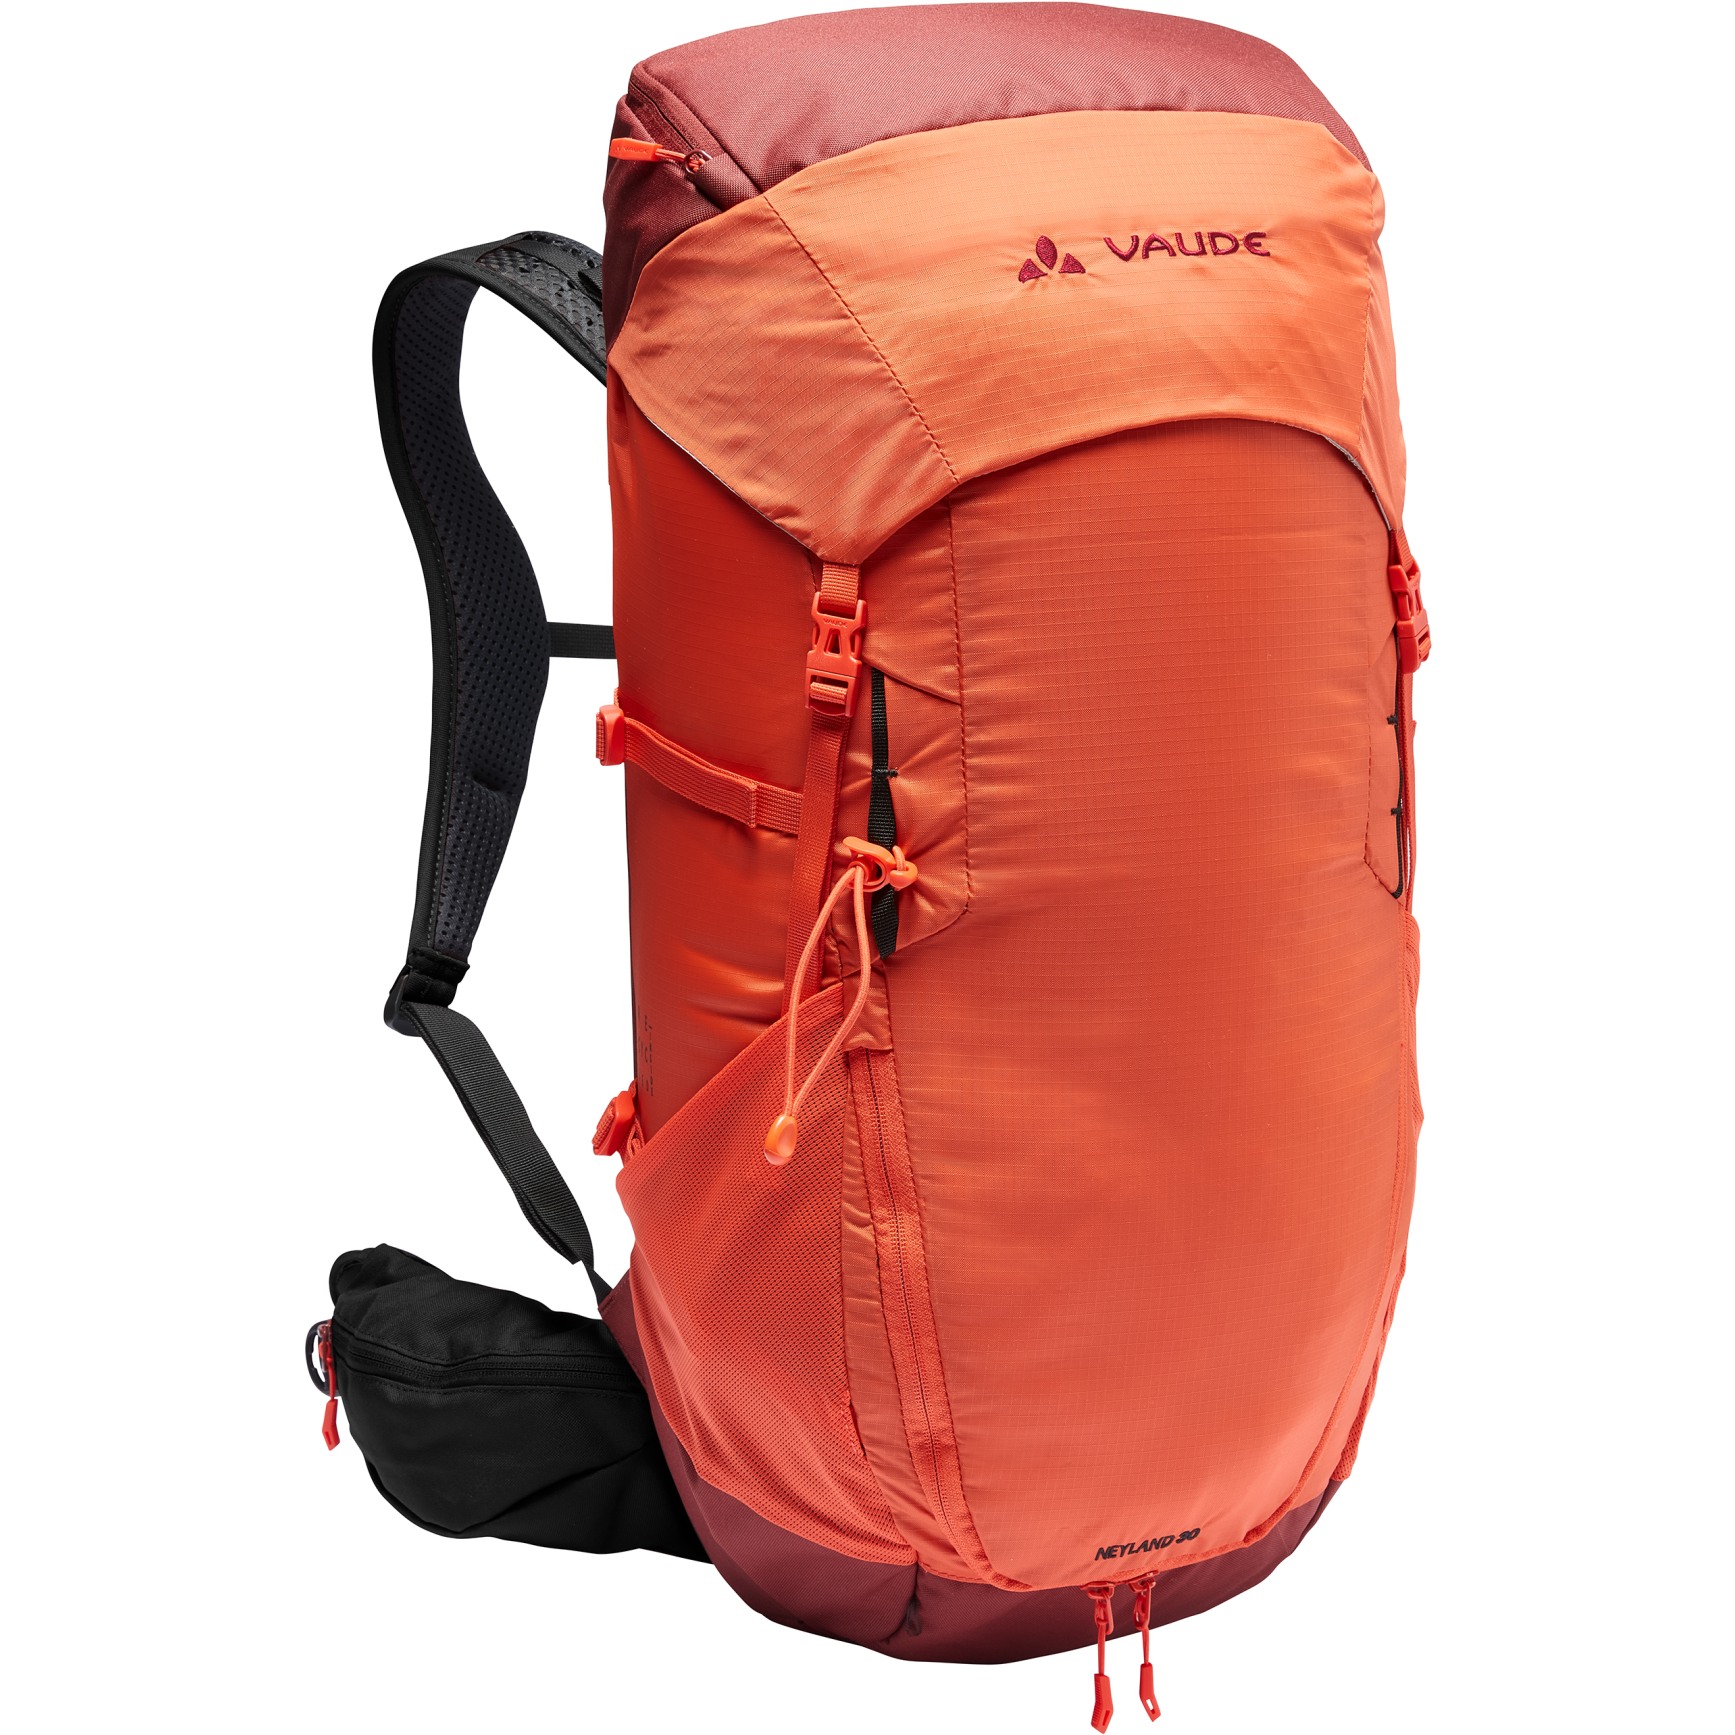 Picture of Vaude Neyland 30L Backpack - burnt red